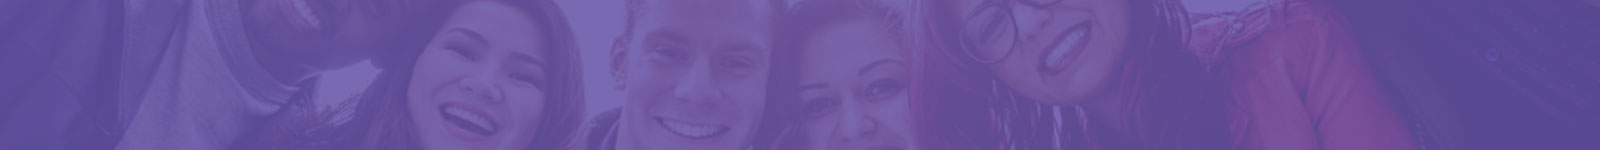 experiences-banner